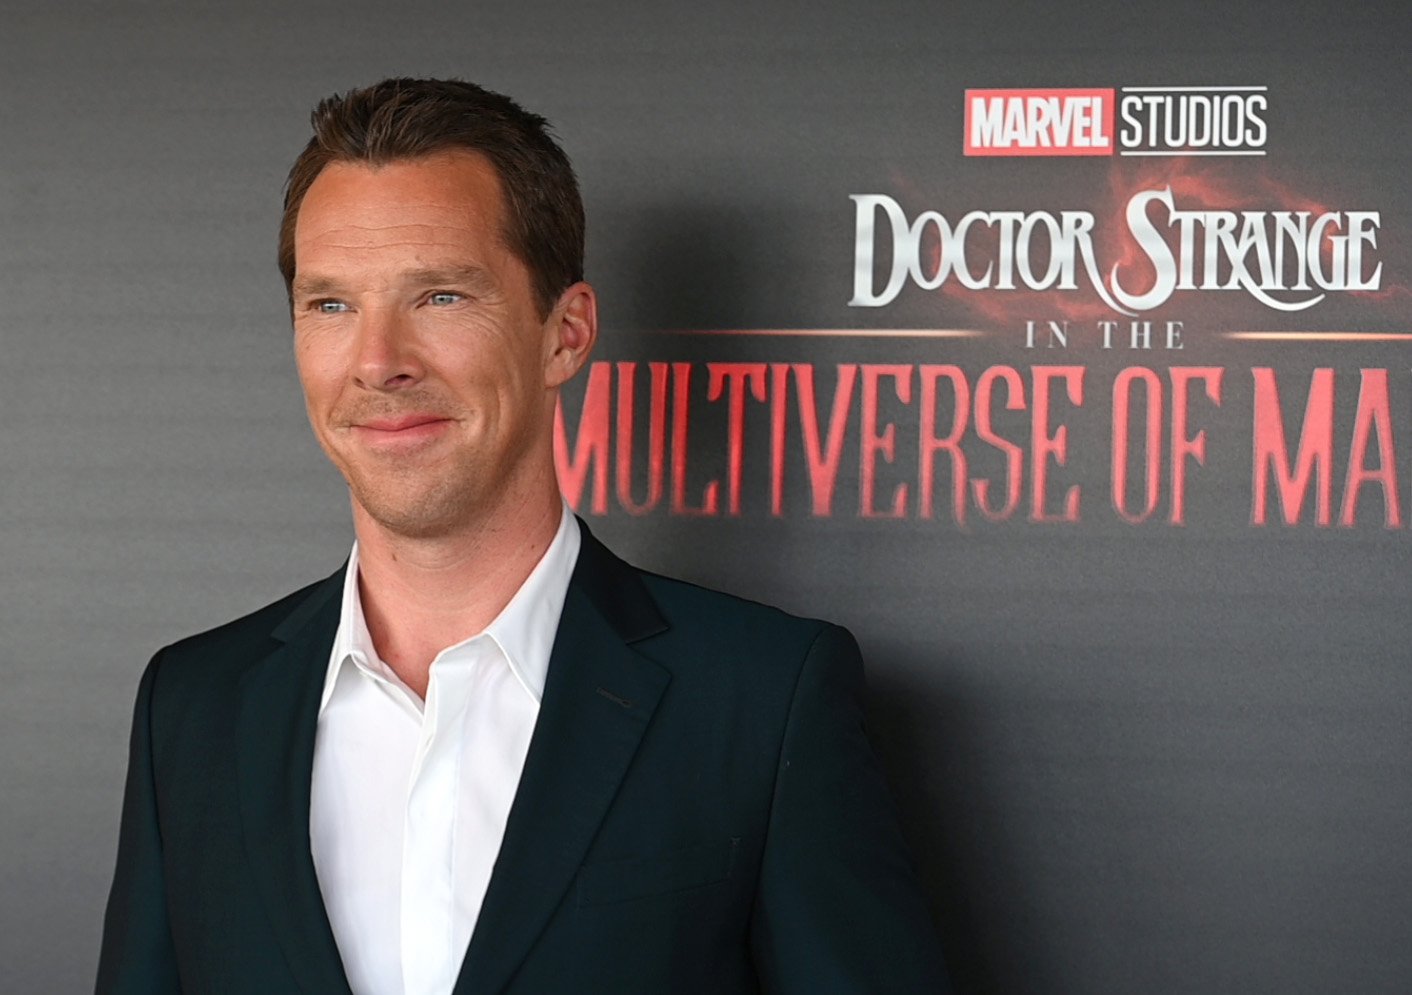 Benedict Cumberbatch, who stars in 'Doctor Strange in the Multiverse of Madness,' wears a black suit over a white button-up shirt.